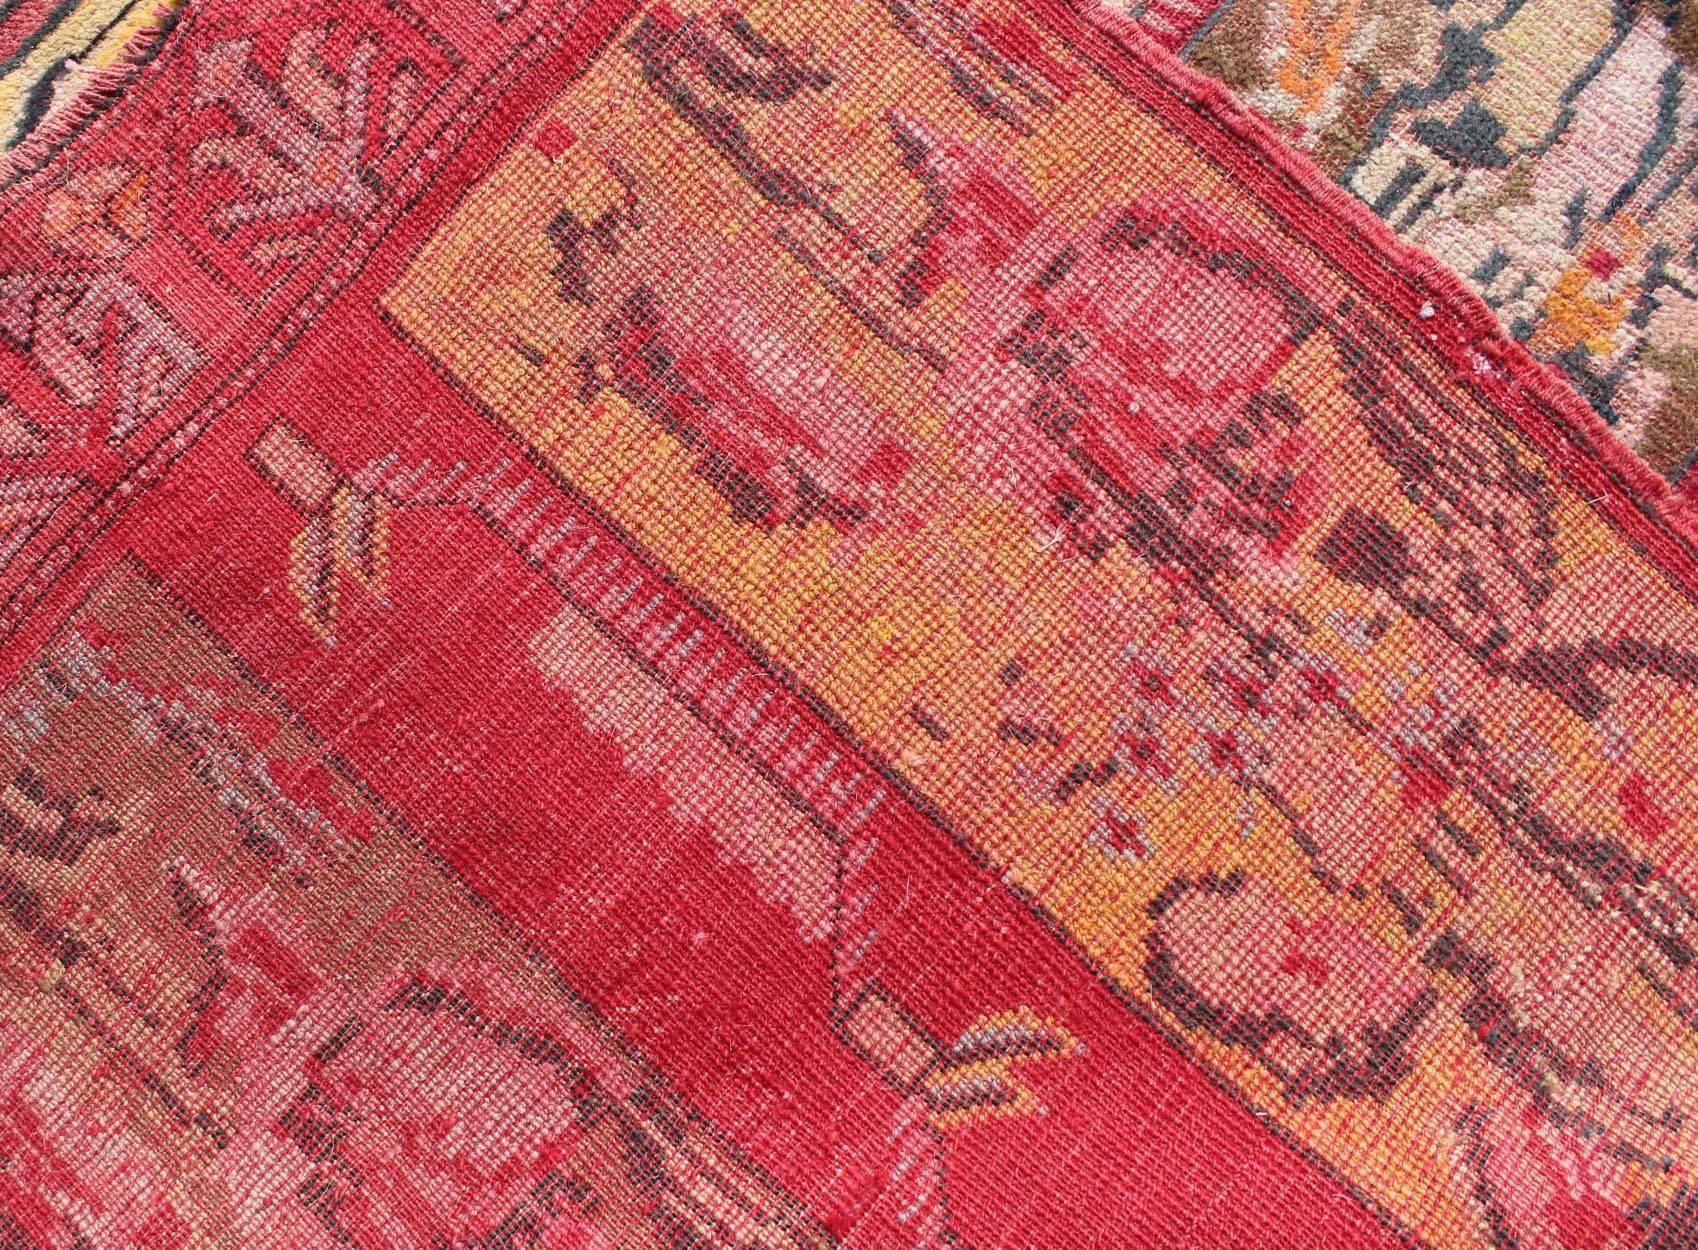 Early 20th Century Antique Turkish Oushak Runner with Saffron Yellow, Light Brown and Red  For Sale